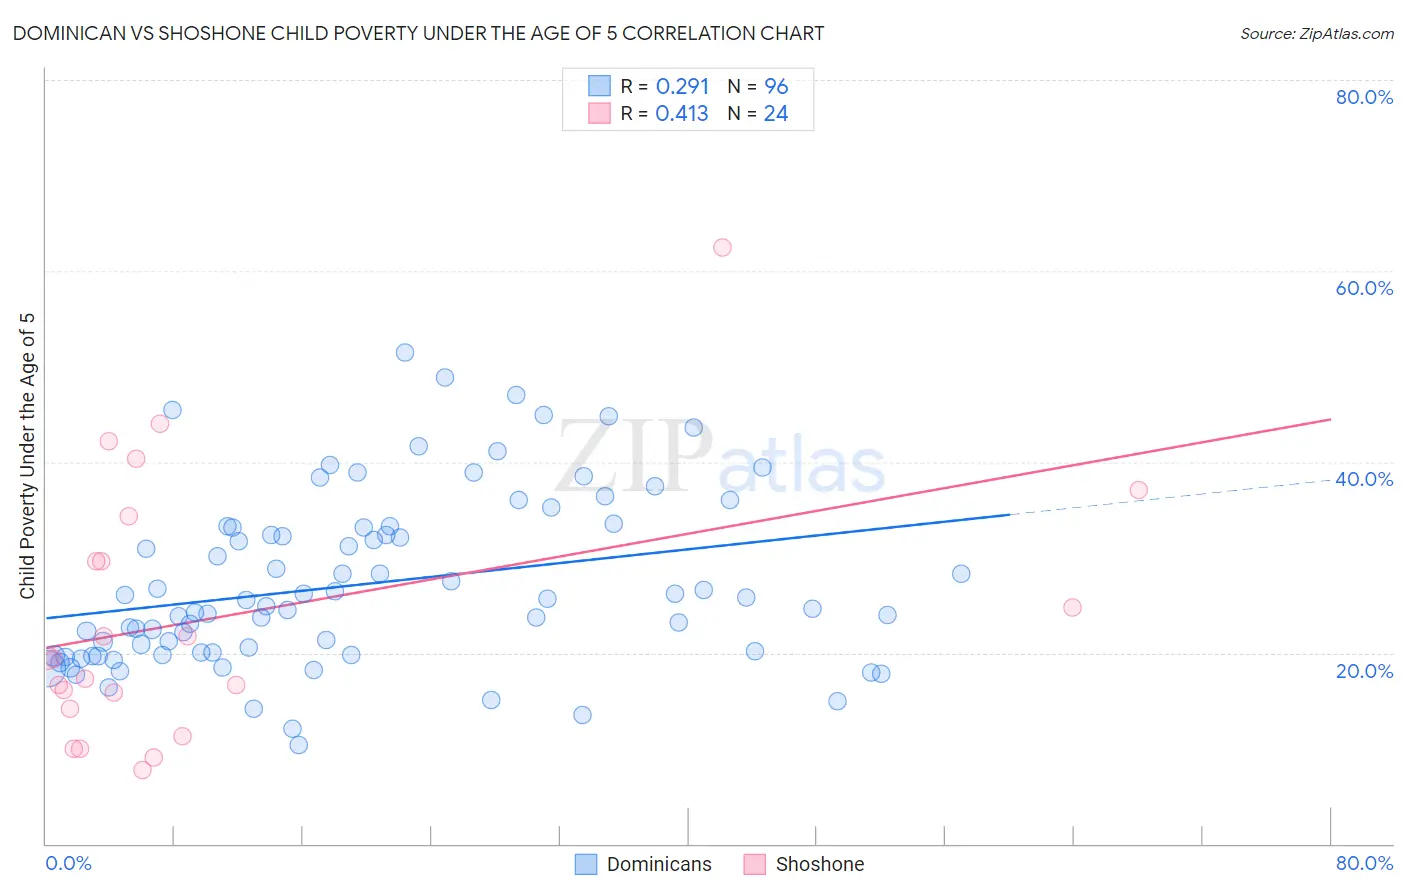 Dominican vs Shoshone Child Poverty Under the Age of 5